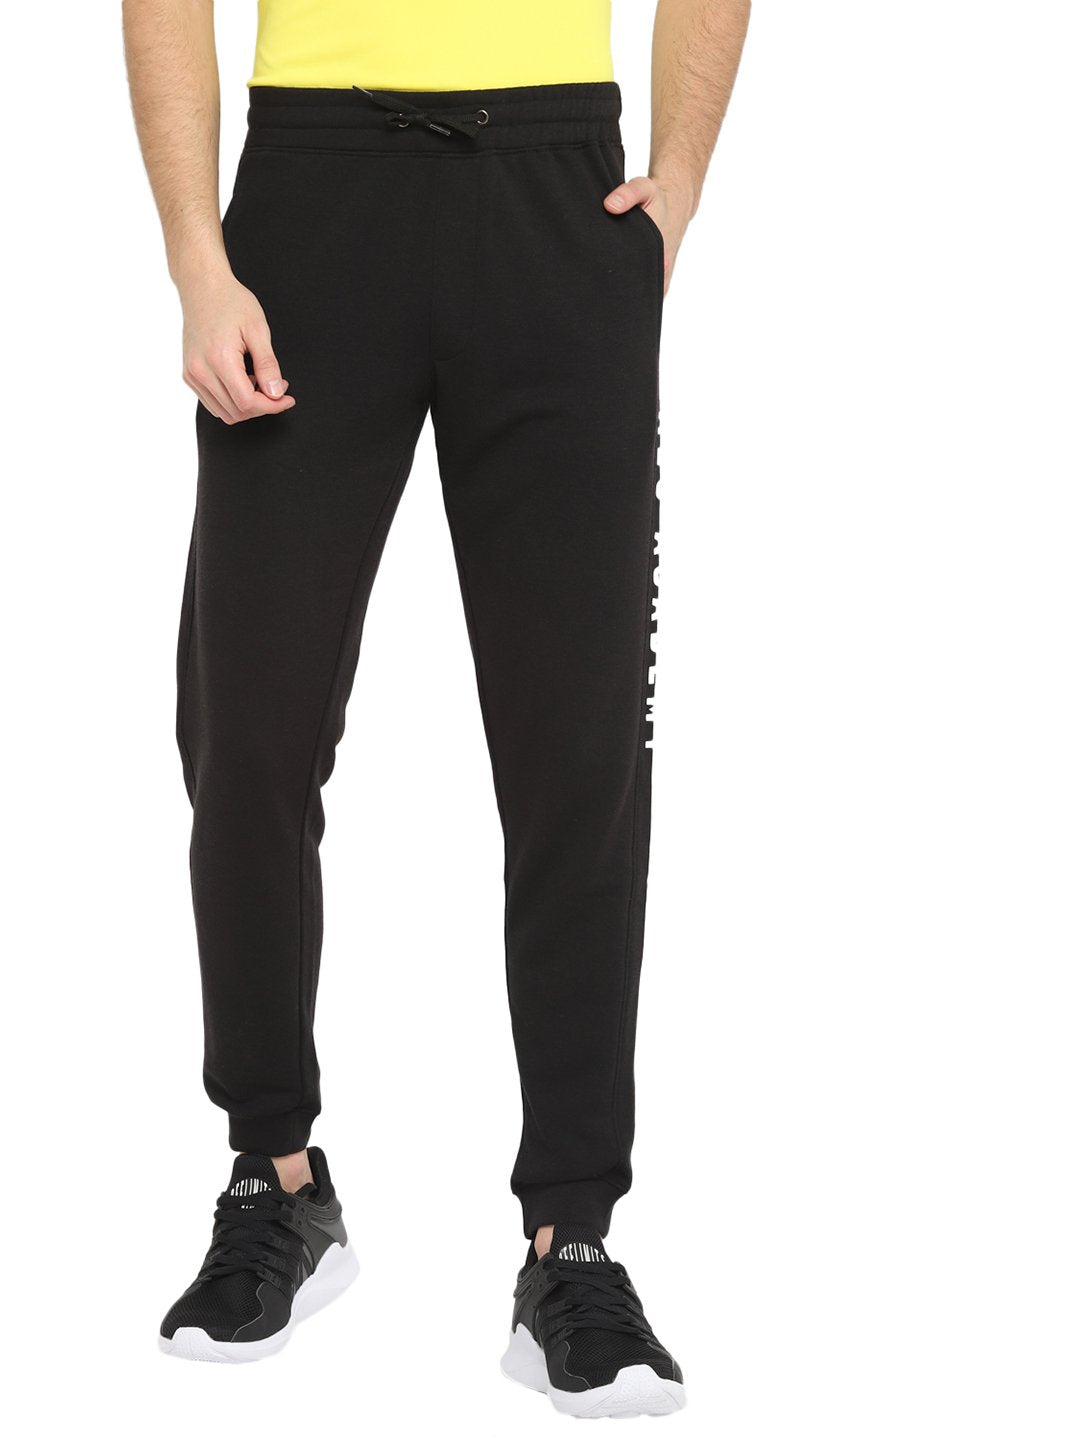 Buy Academy Brand Pants  Clothing Online  THE ICONIC